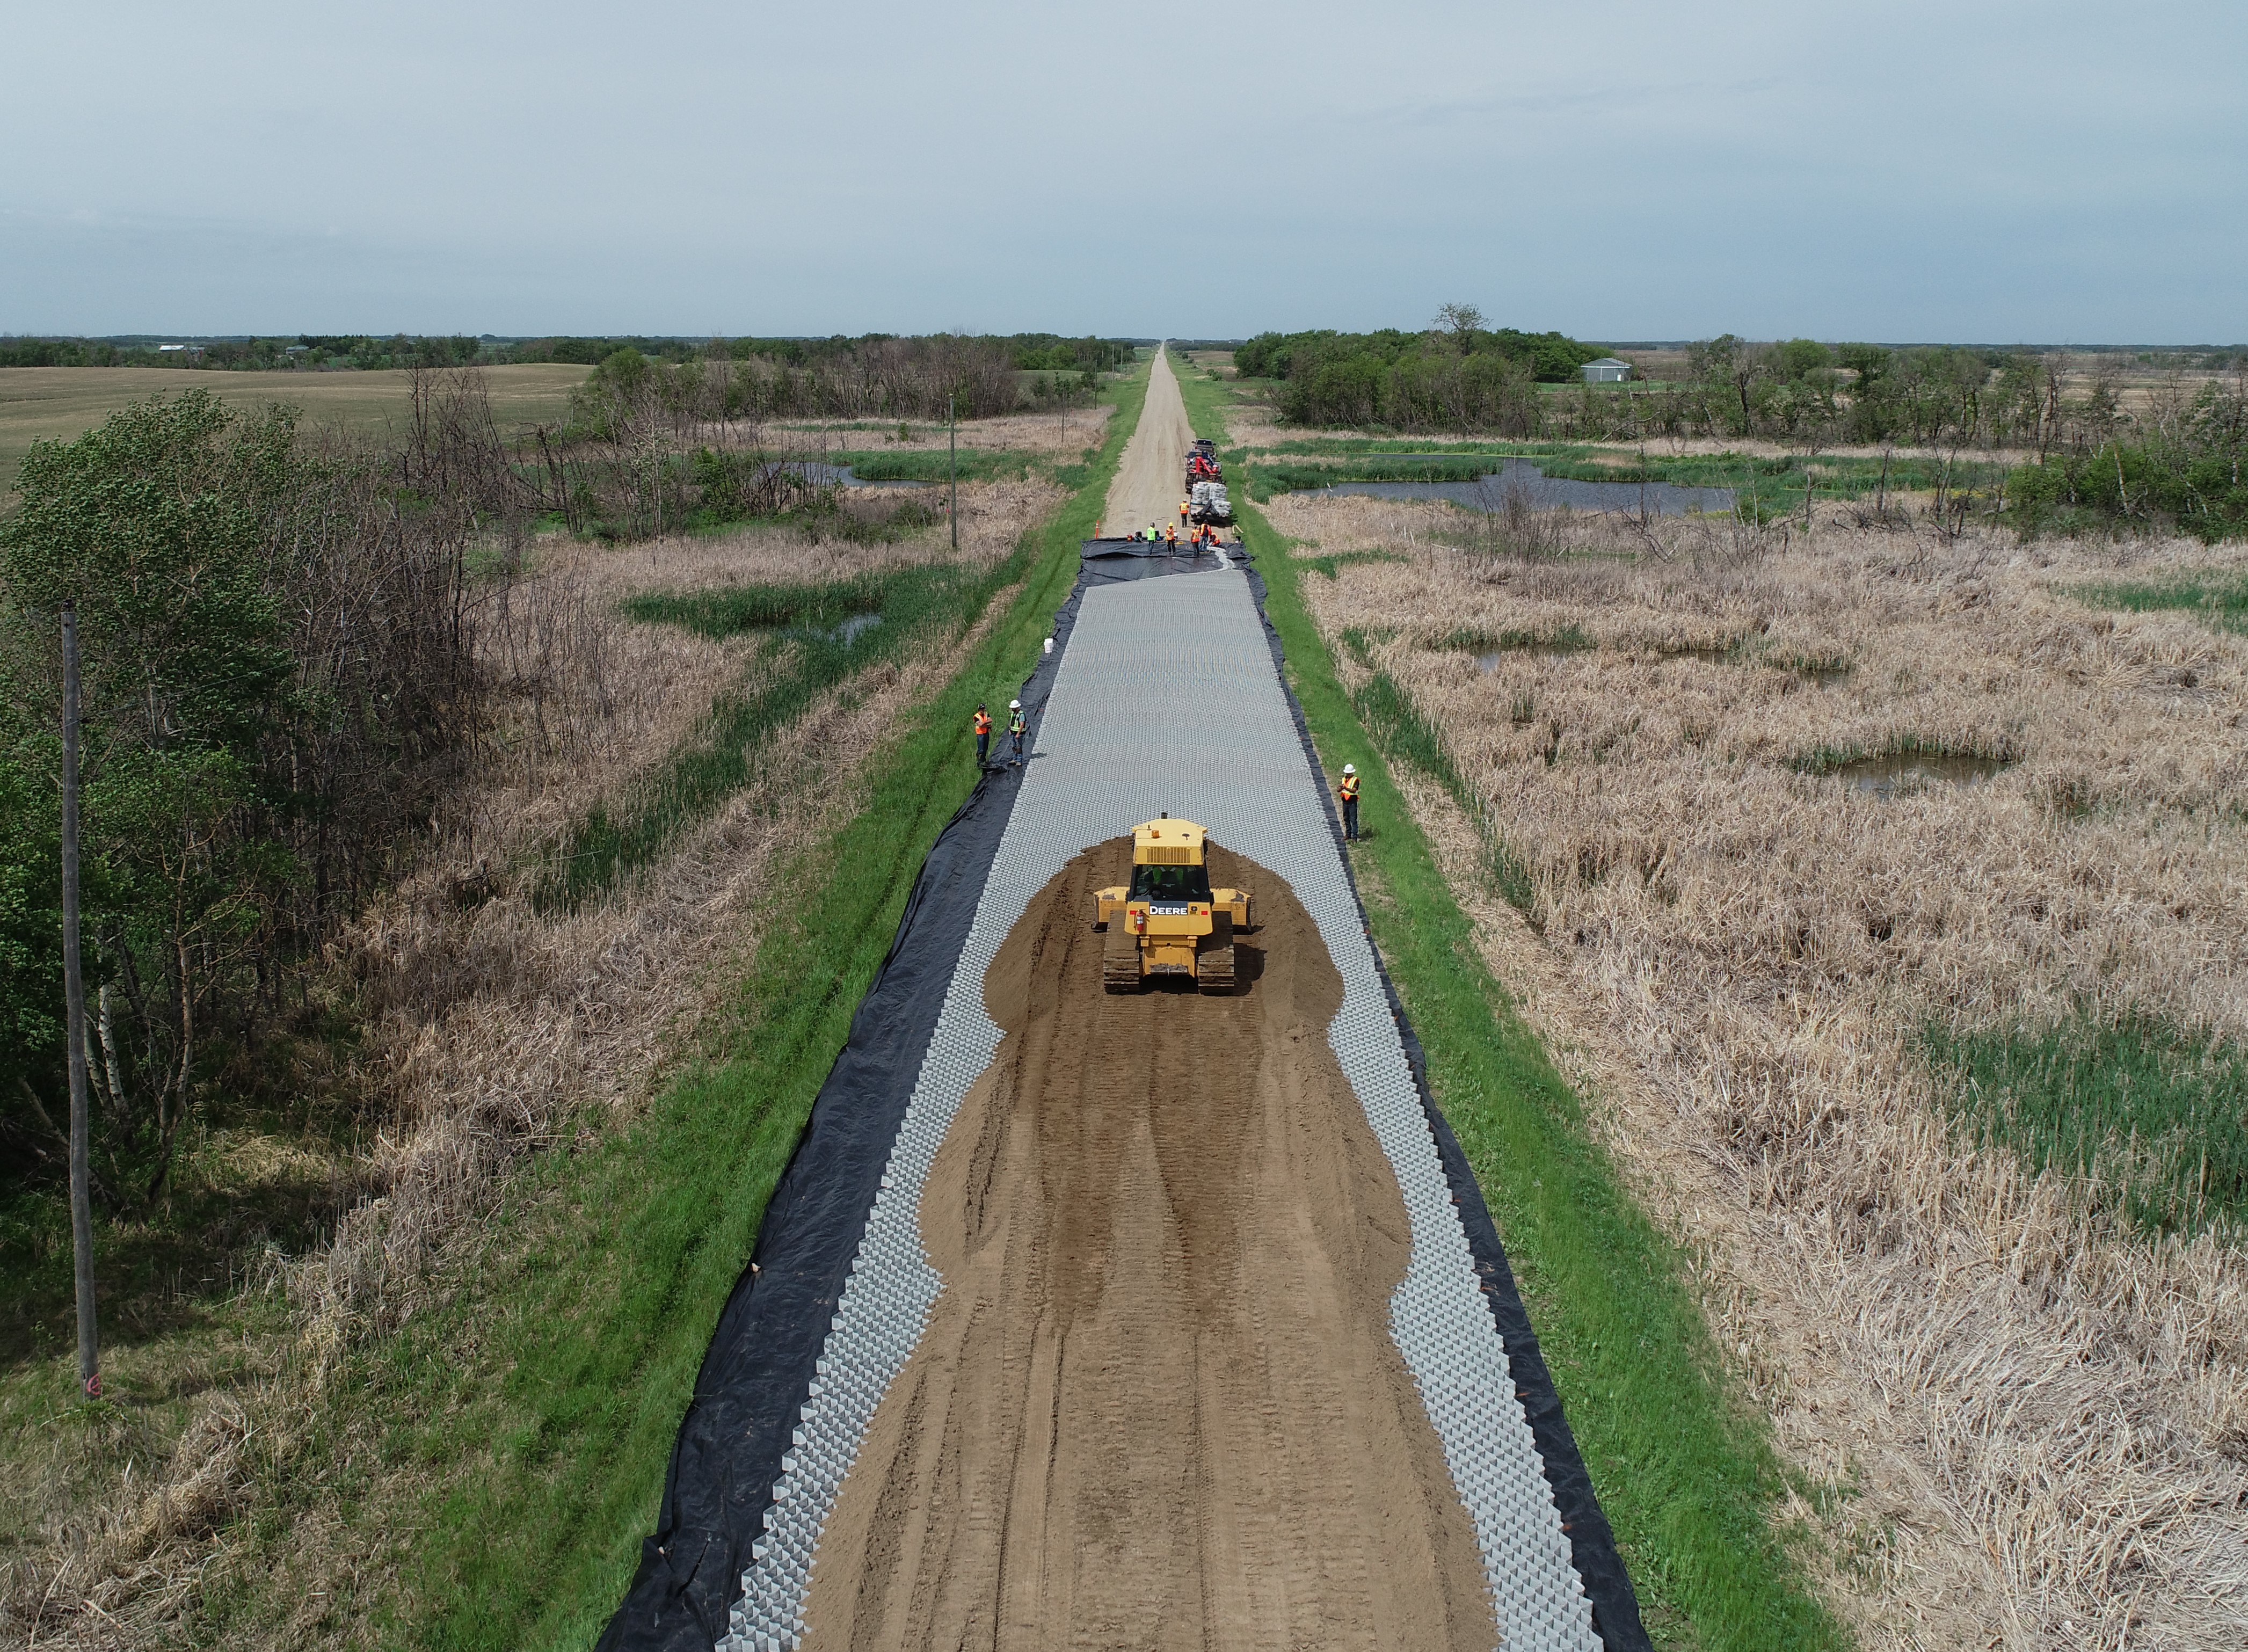 A road crew uses construction equipment to work on a wide gravel road, with fields on both sides